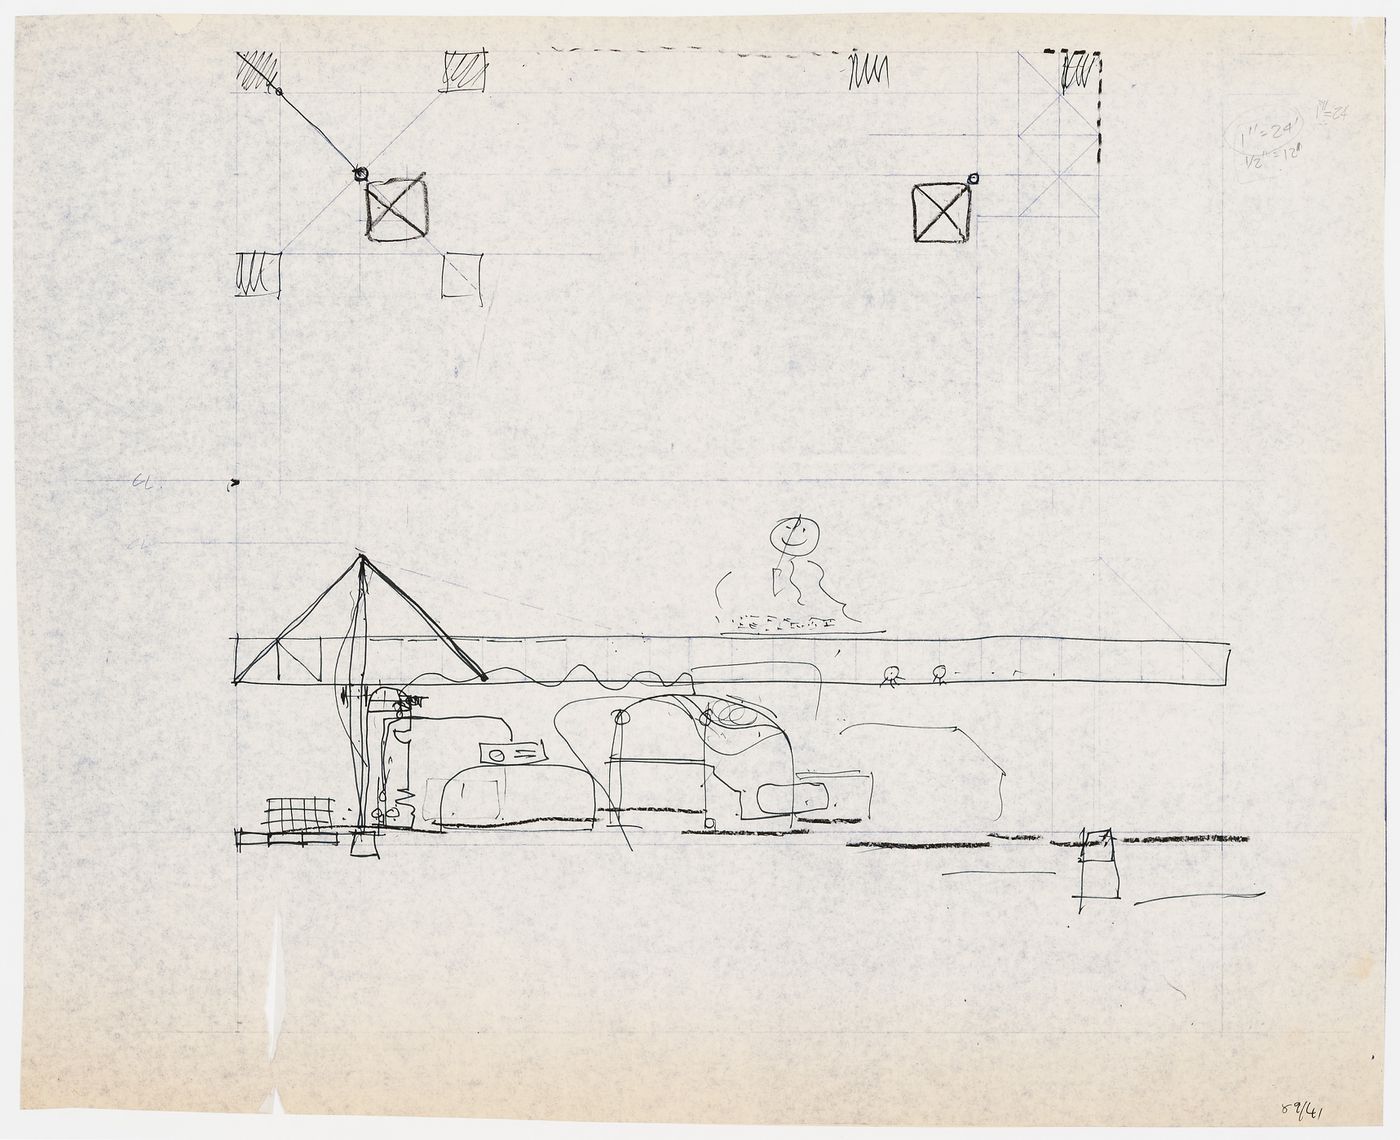 Sketch plan and section for the Life Conditioner Tent (LC Tent) (Atom project)